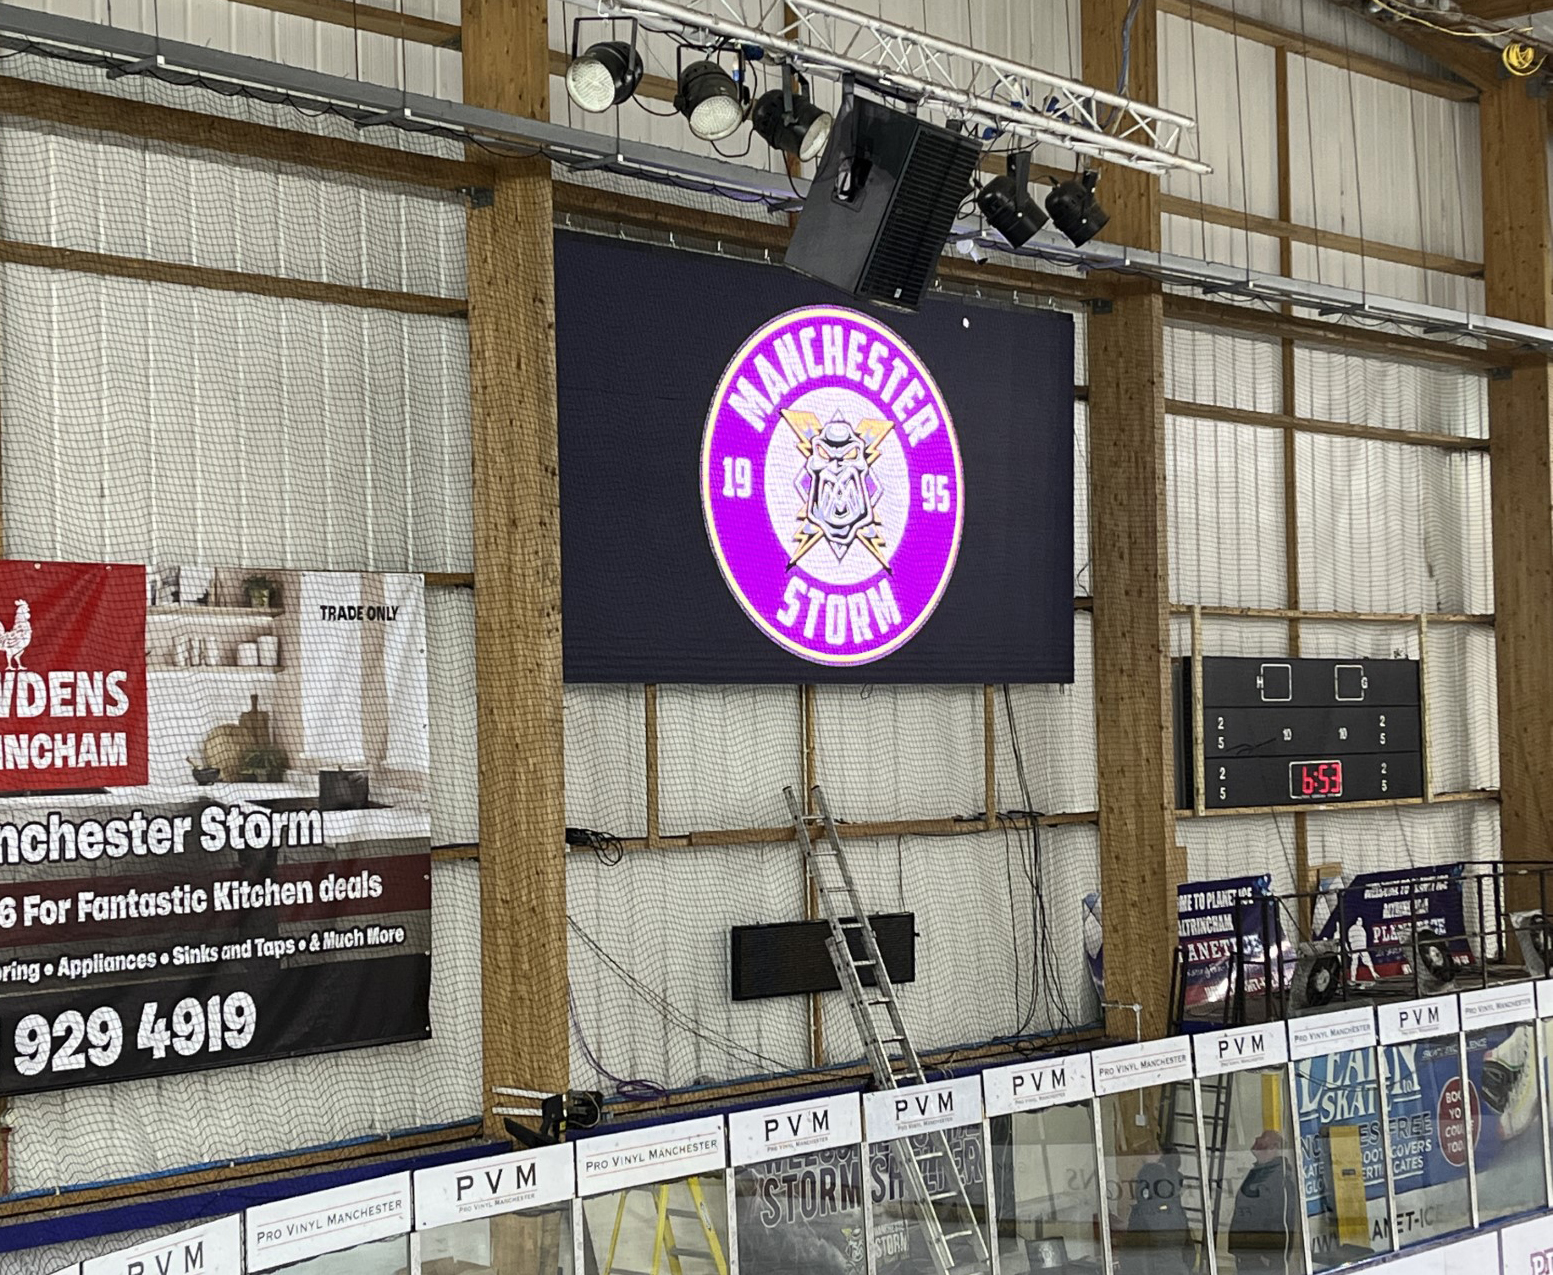 large screen installation at Altrncham Ice Areana - showing installed screen on the wall